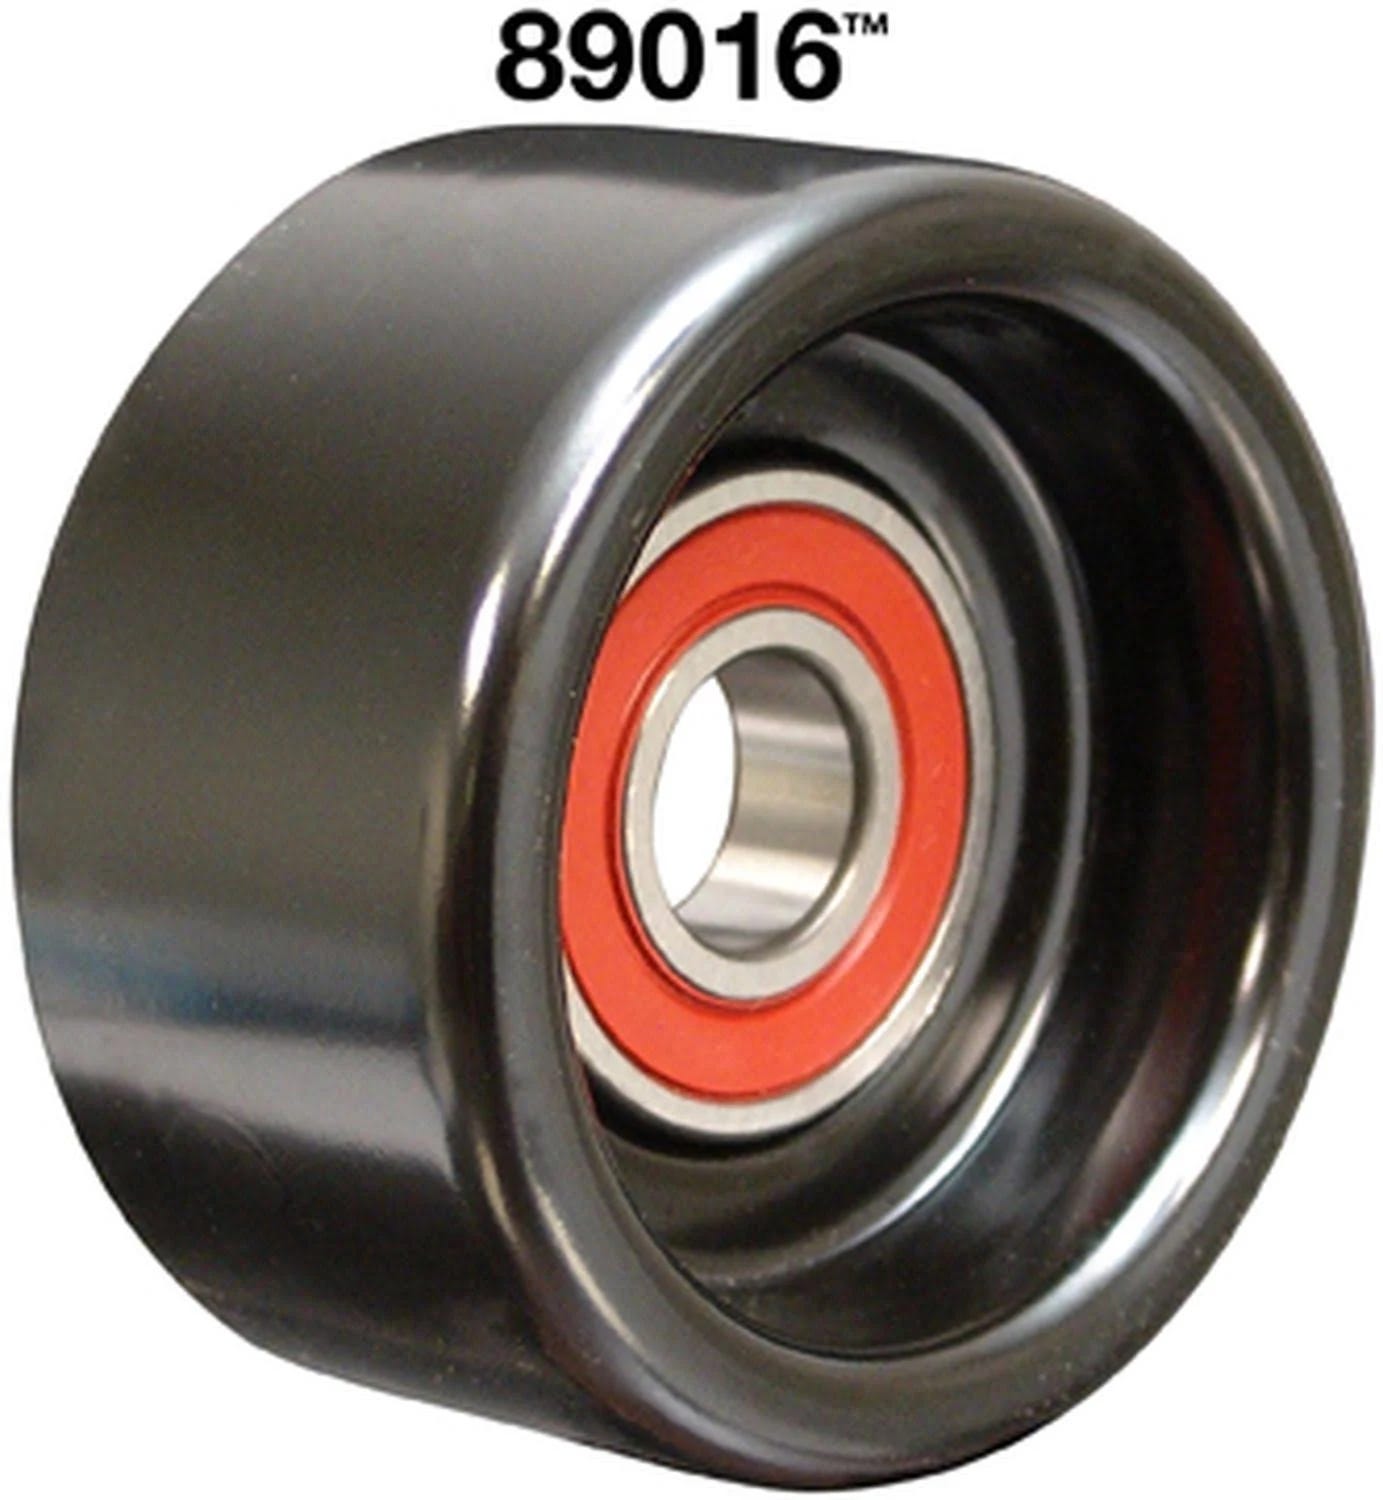 Dayco 89016 Drive Belt Tensioner Pulley Kit | Image